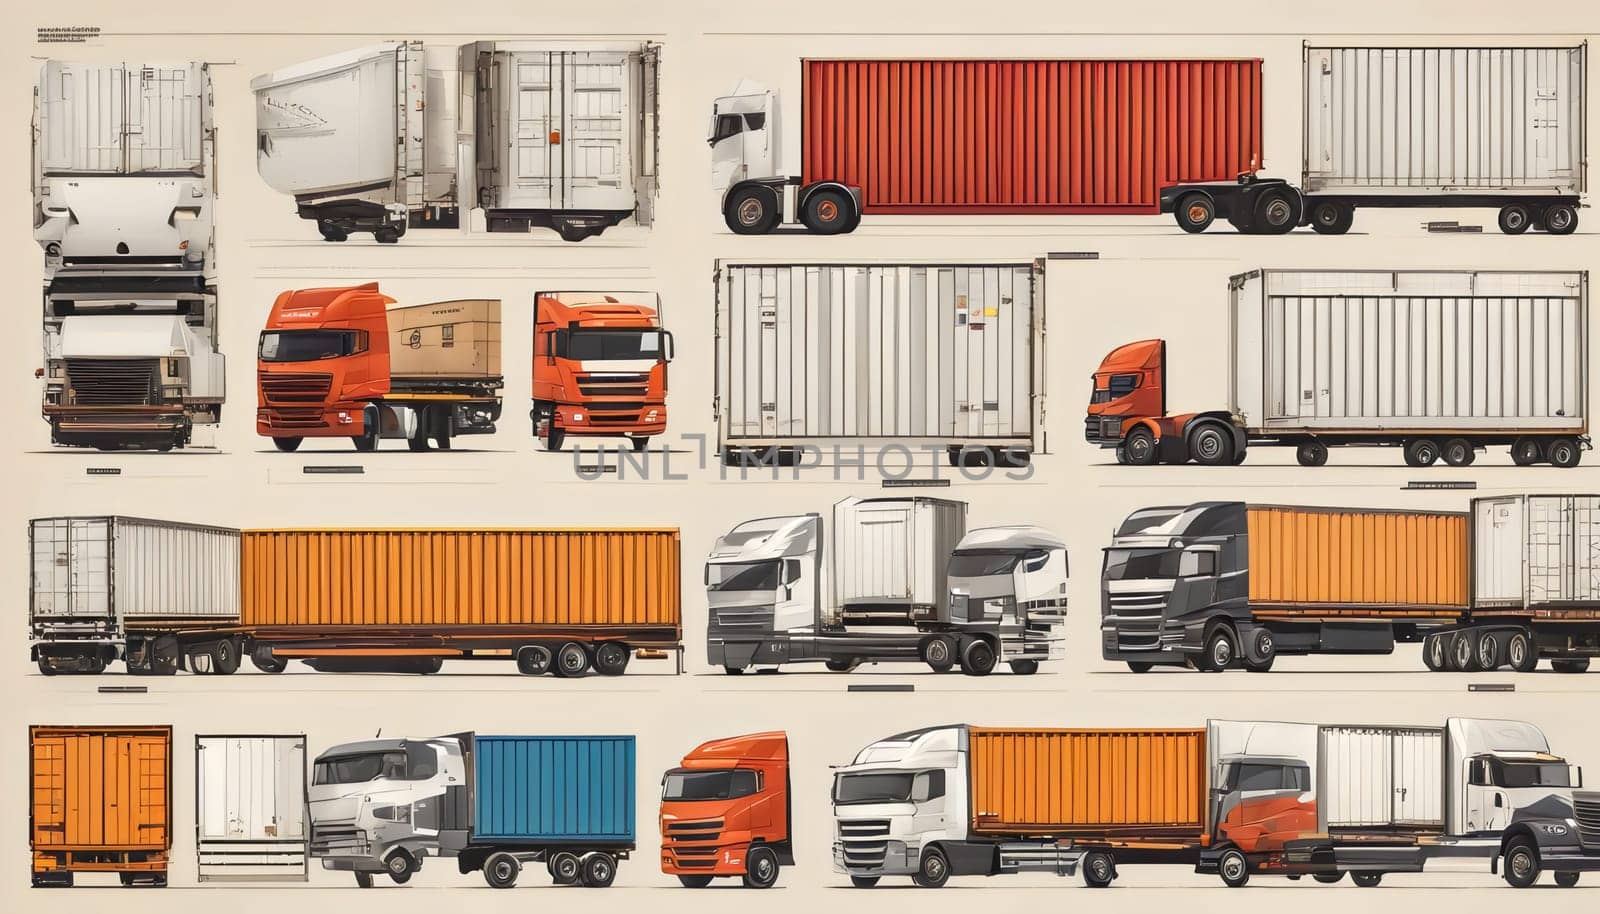 Variety of Trucks and Cargo Containers Created by artificial intelligence